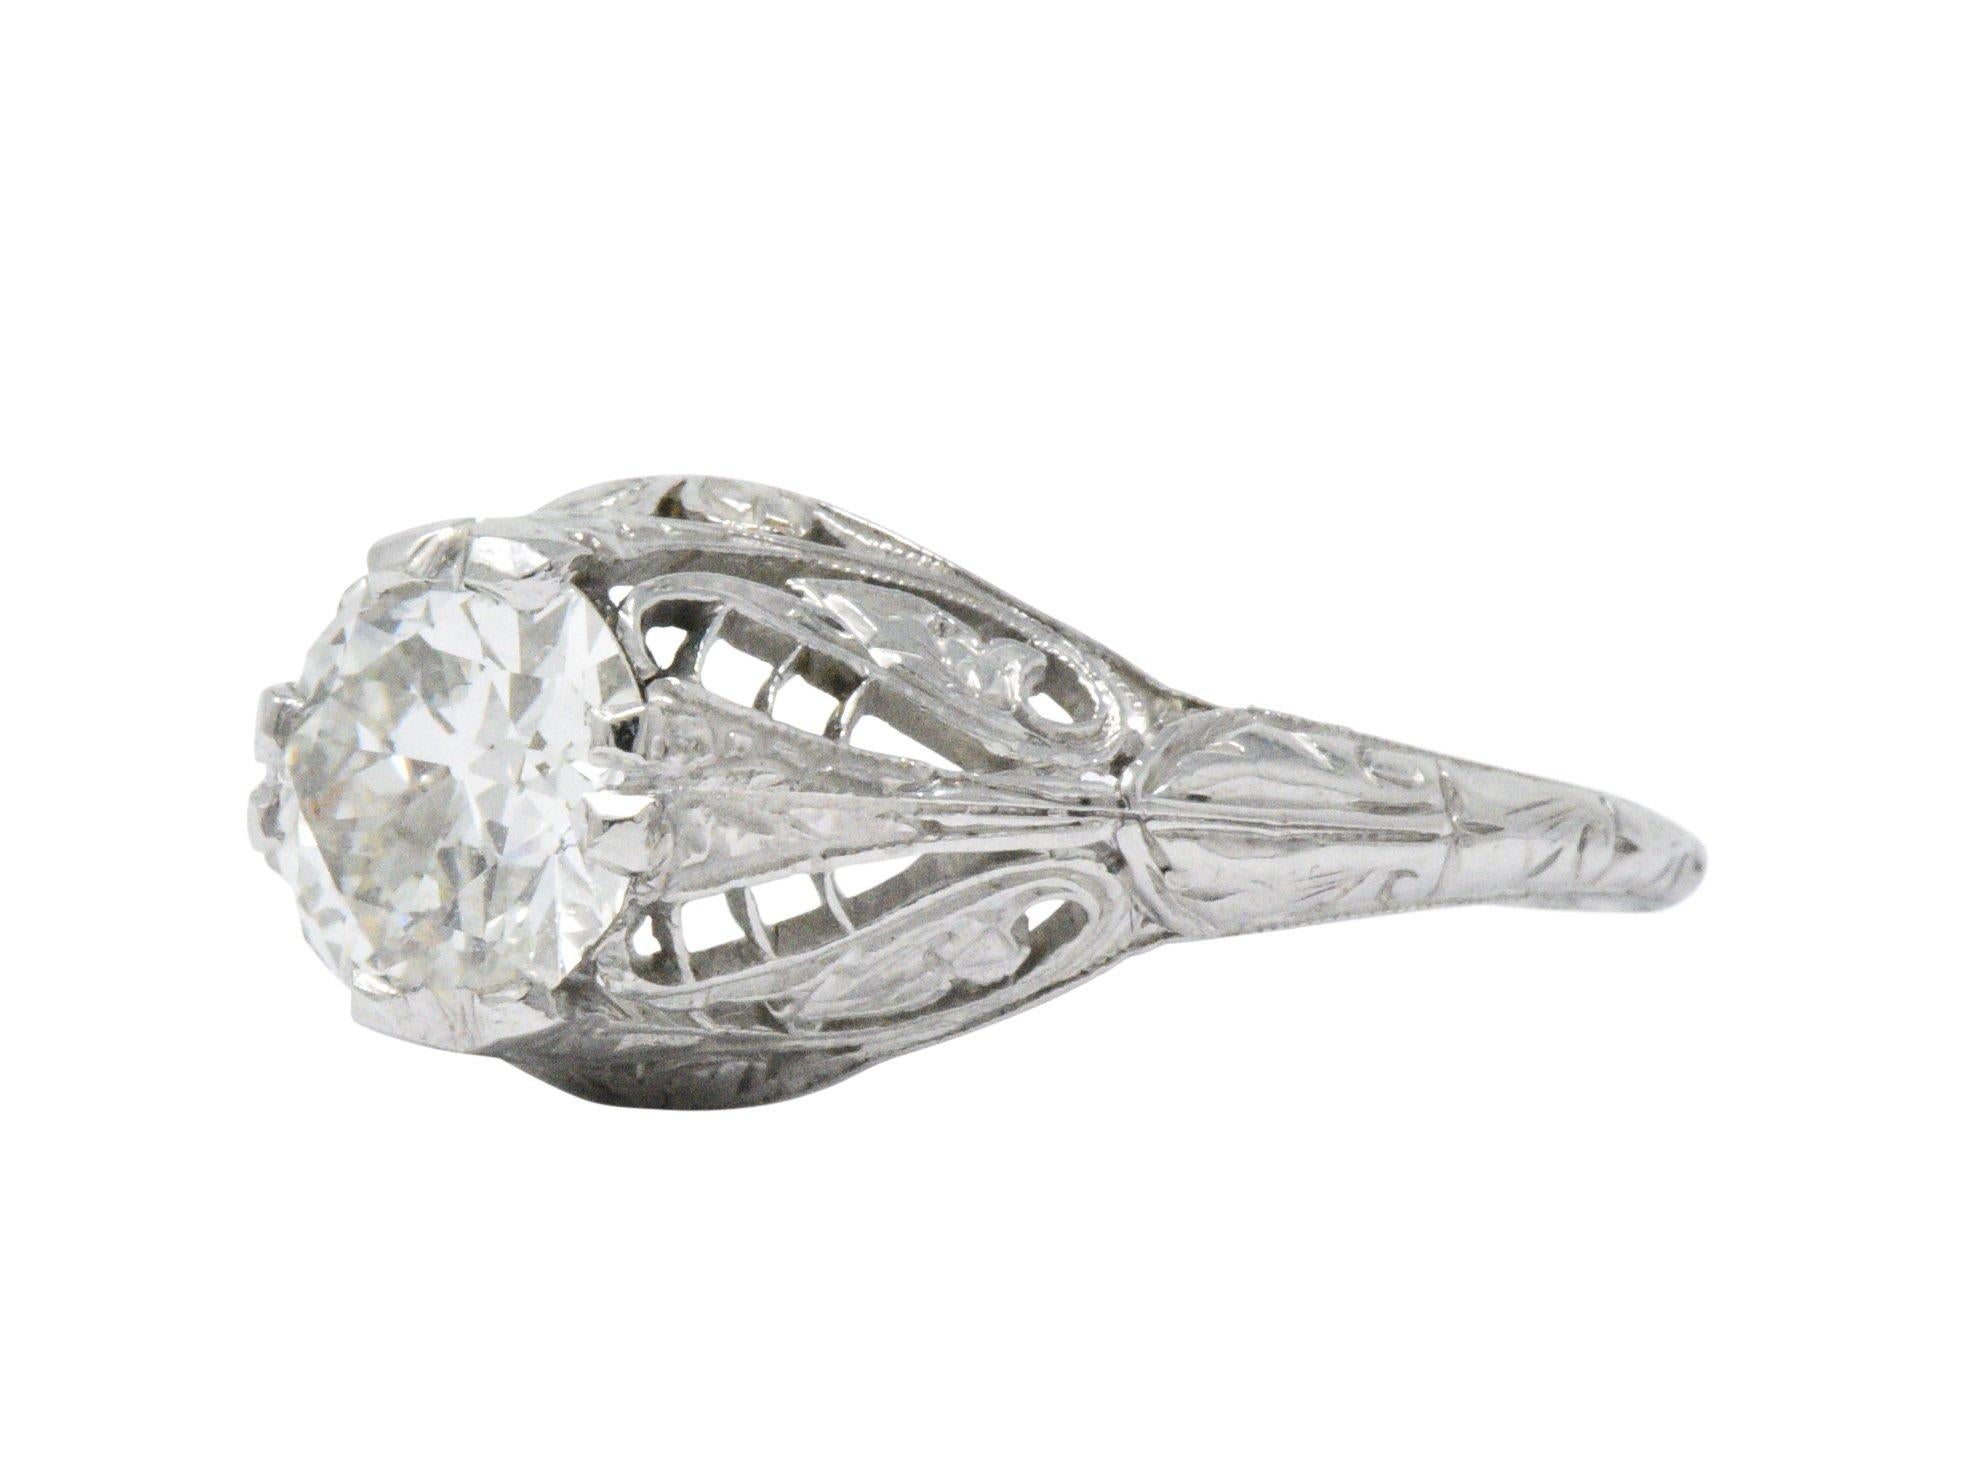 Centering a round brilliant cut diamond weighing 1.09 carats, K color and VS1 clarity

Prong set low in pierced mounting by stylized leaf-like prongs 

Completed by ornate gallery and engraved foliate details

Tested as platinum

Circa: 1920s

Ring